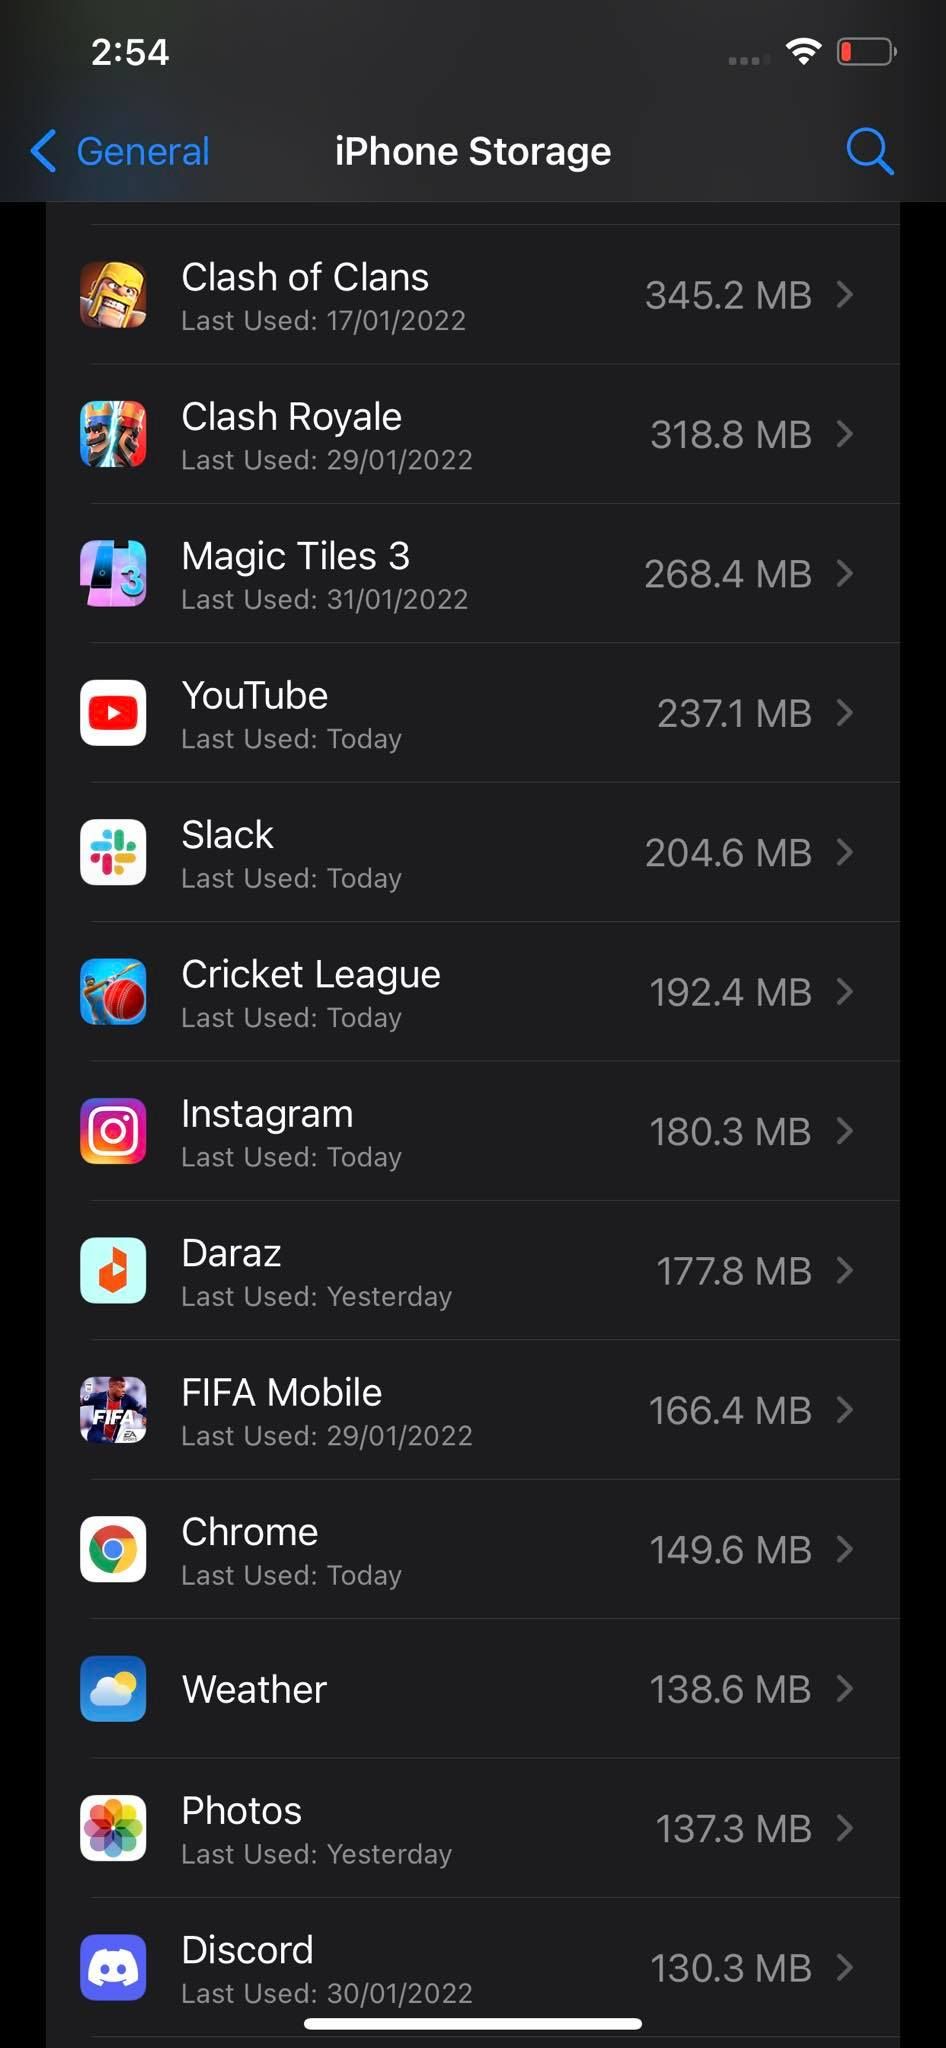 Instagram in the List of Installed Apps Alongwith The Storage Space They Are Consuming in iOS